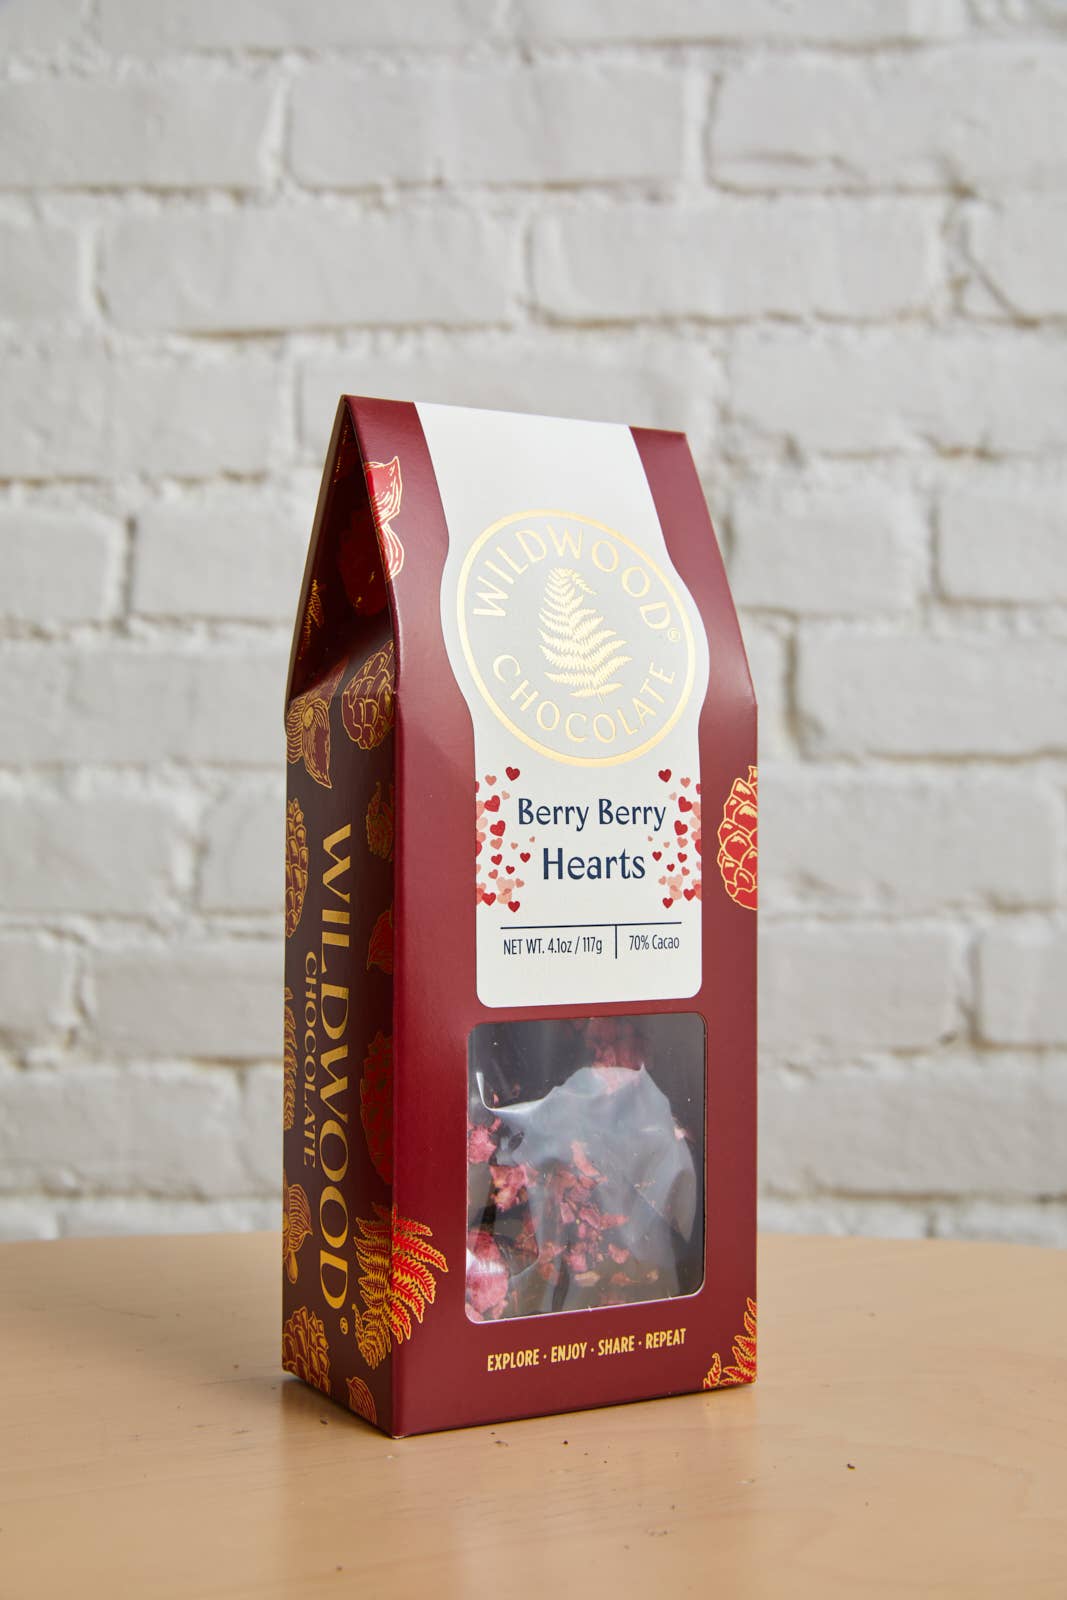 Wildwood Chocolate - Berry Berry Hearts for Valentine's Day